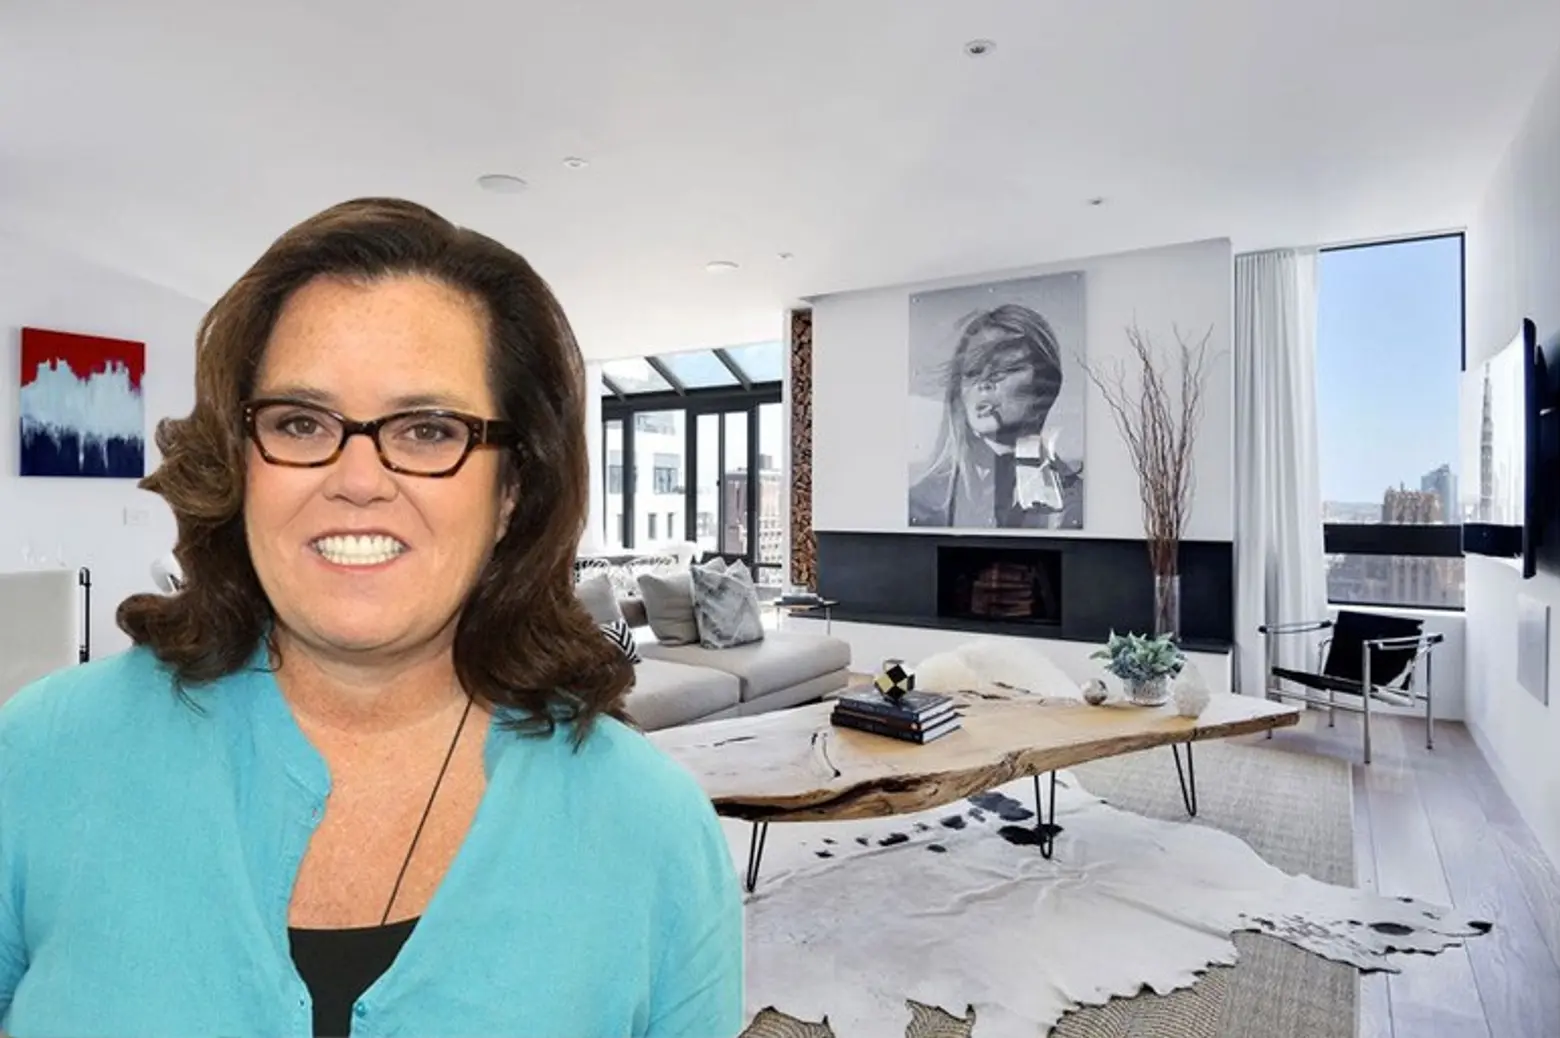 Rosie O’Donnell drops $8M on a swanky Midtown East penthouse